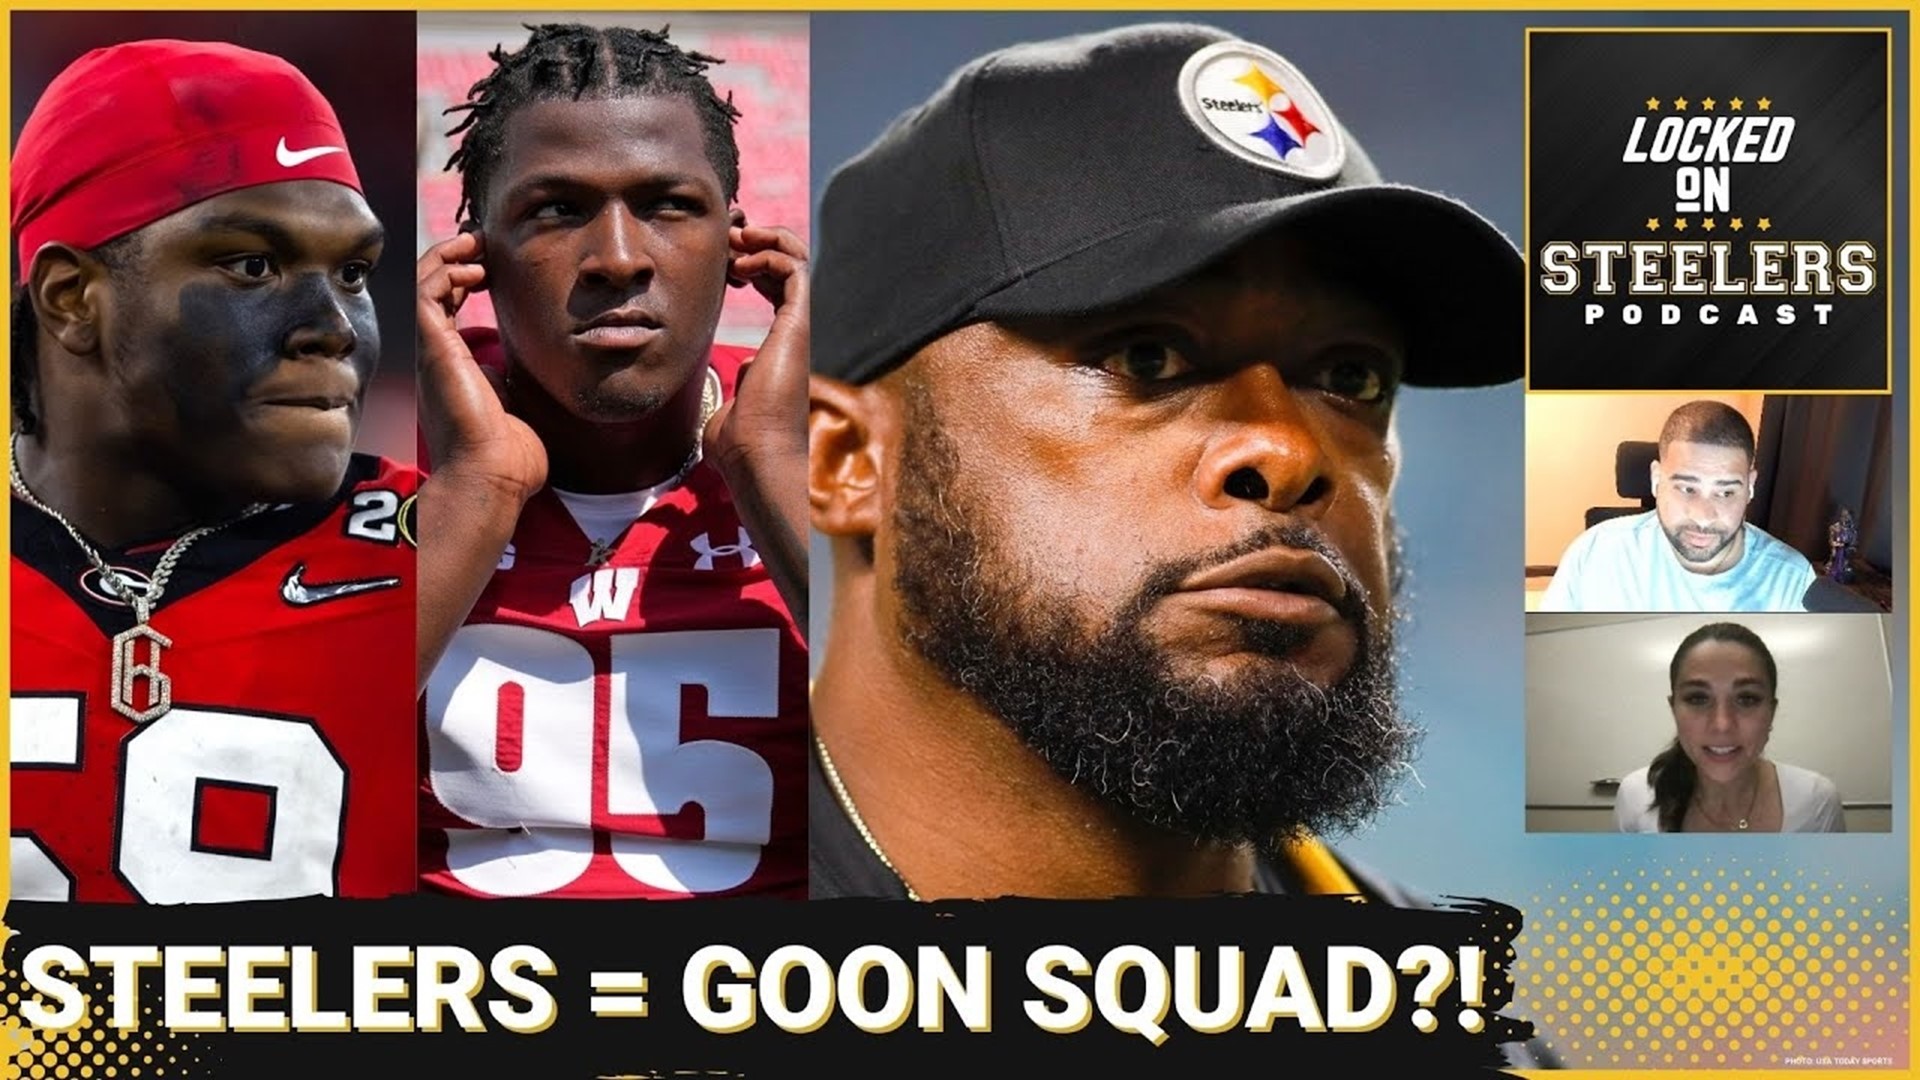 The Pittsburgh Steelers' 2nd round pick, defensive tackle Keeanu Benton, said Mike Tomlin wants "goons" on his roster.